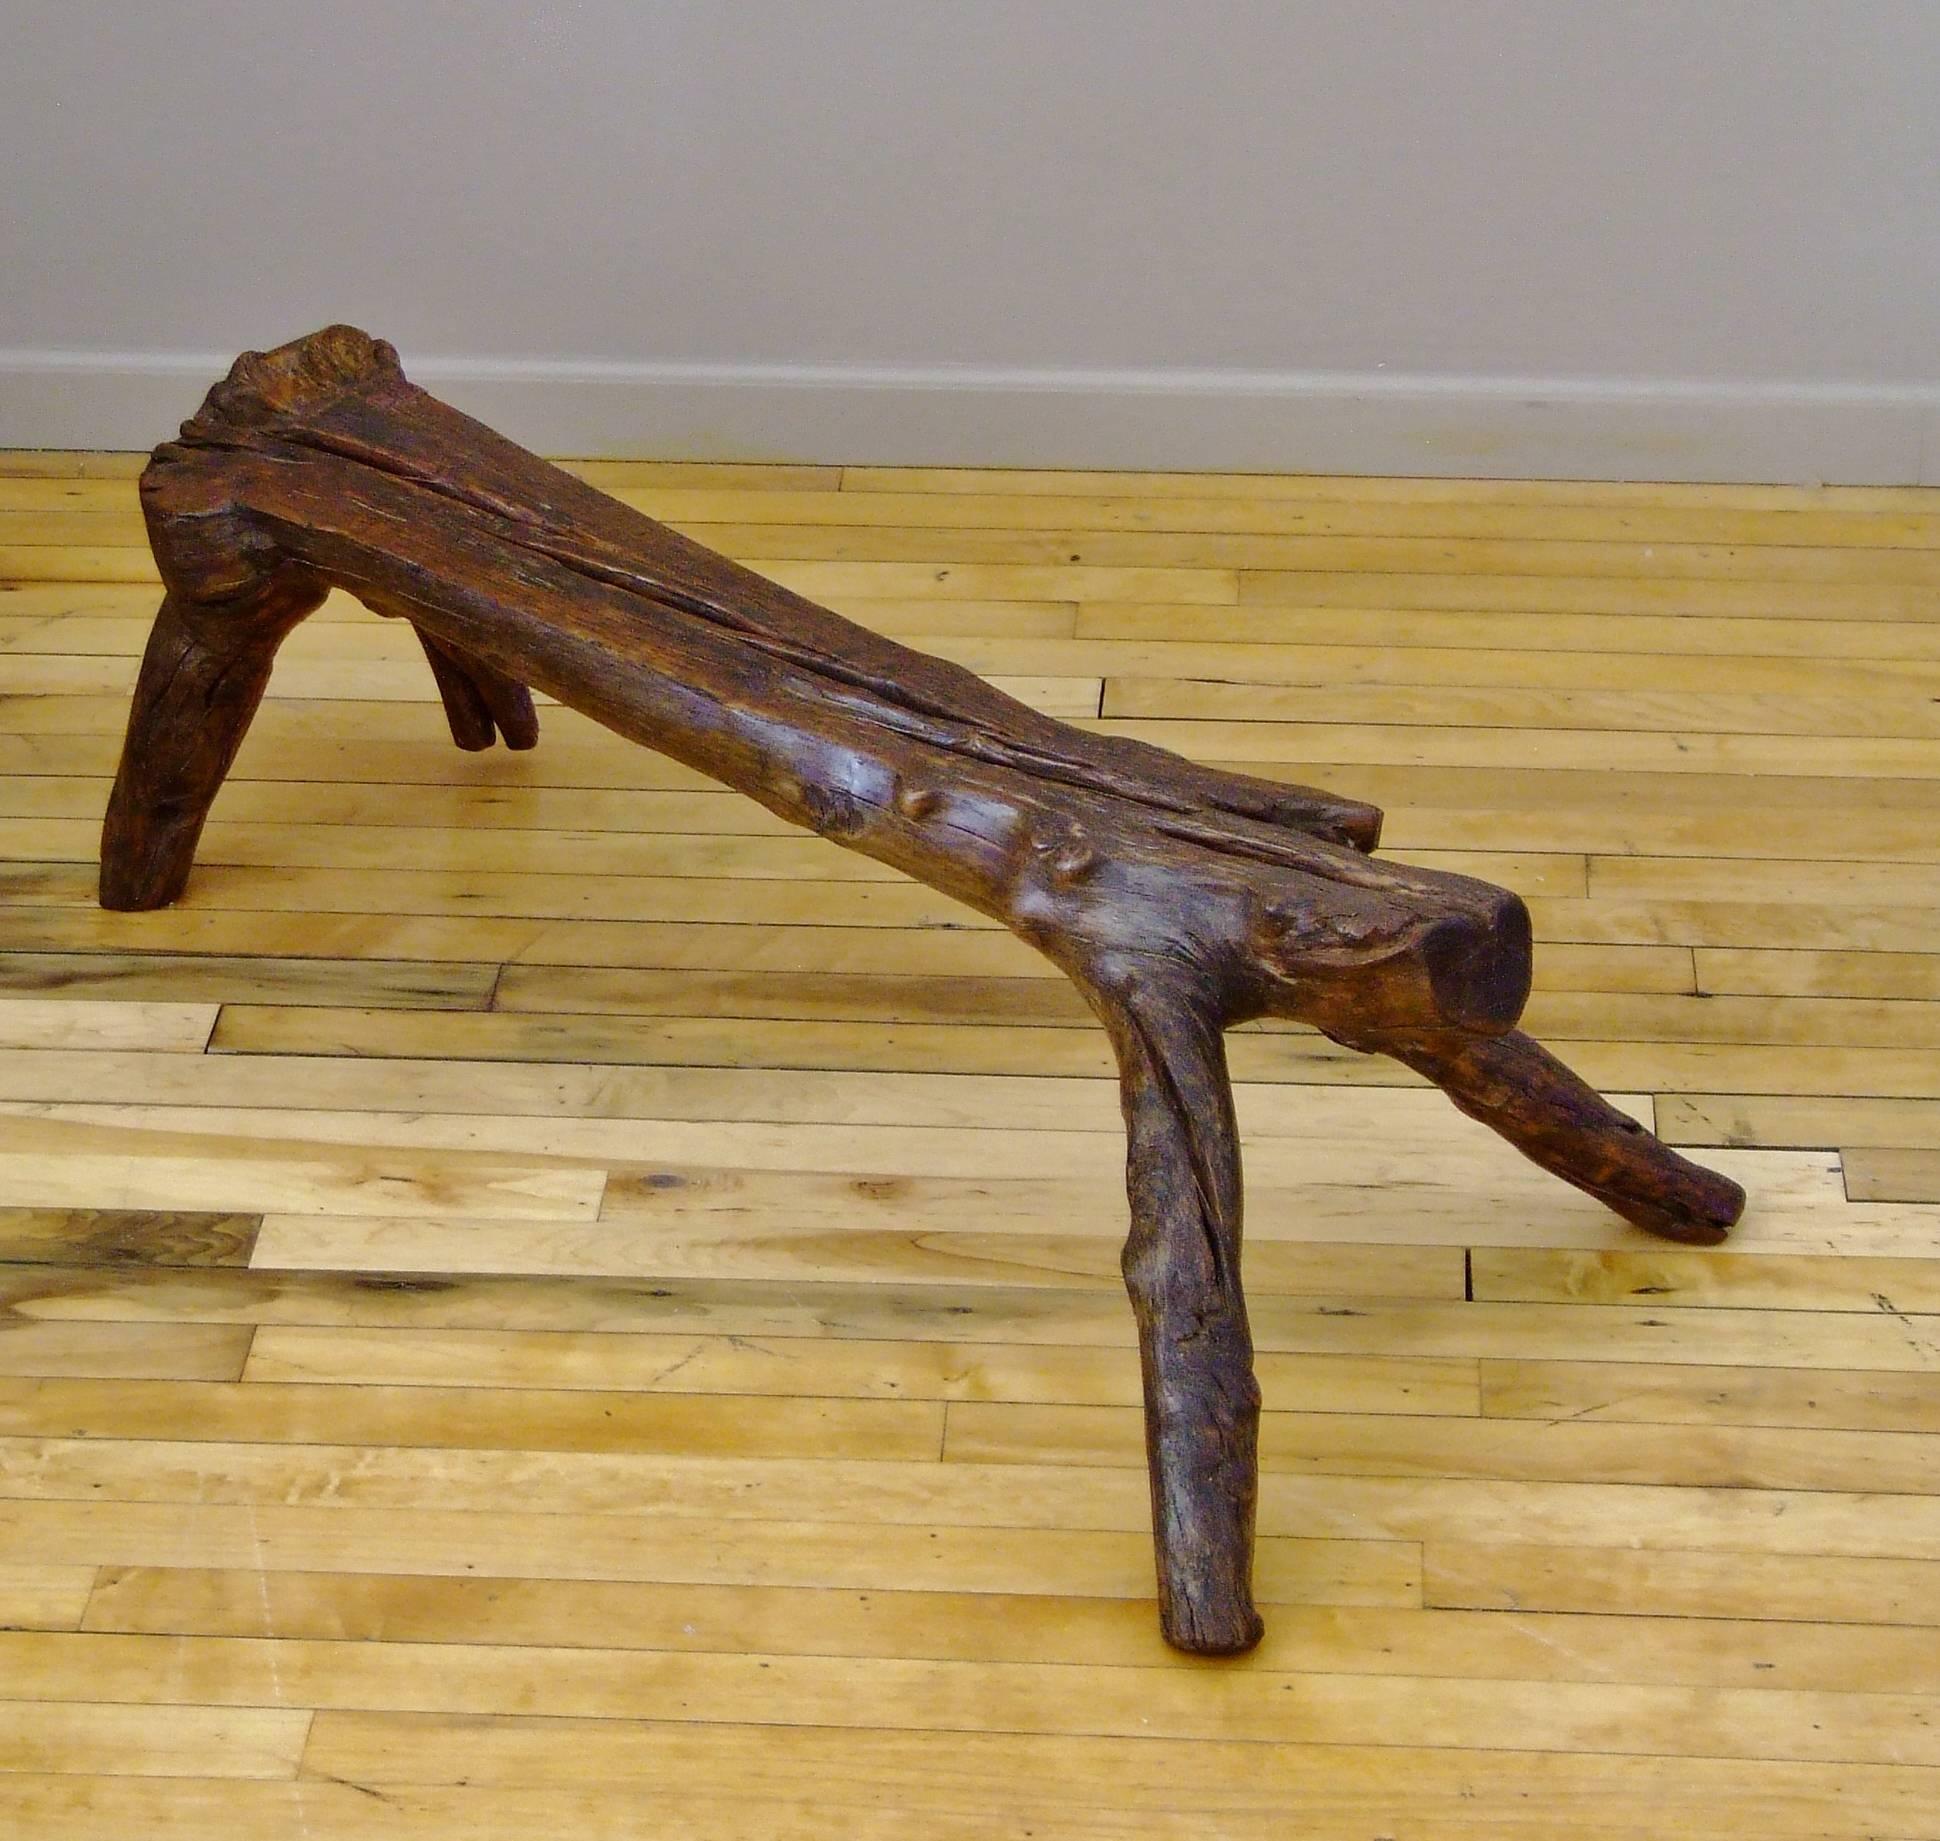 Provincial Chinese low bench formed from the natural branching of elmwood. It resembles the stance of an animal waiting to pounce. A heavy piece that can be used as a bench or footstool and appreciated as an example of Chinese Folk Art.